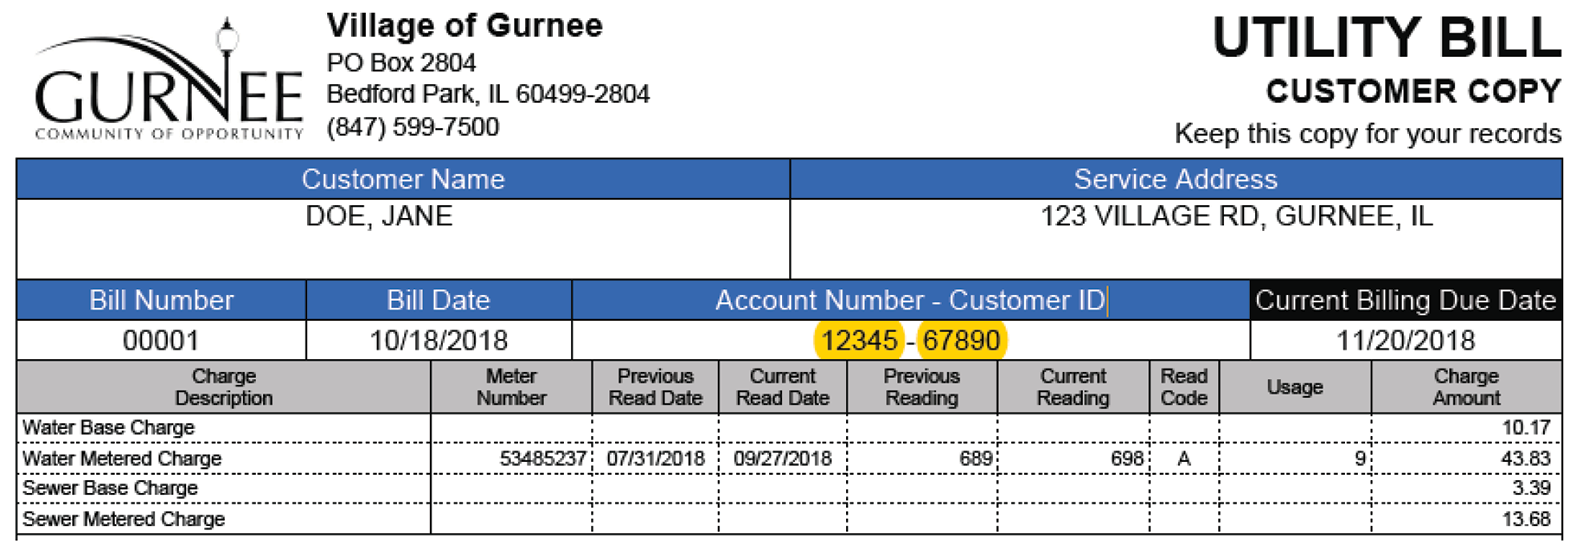 Picture of current water bill with account number and customer ID highlighted to show location on bill.